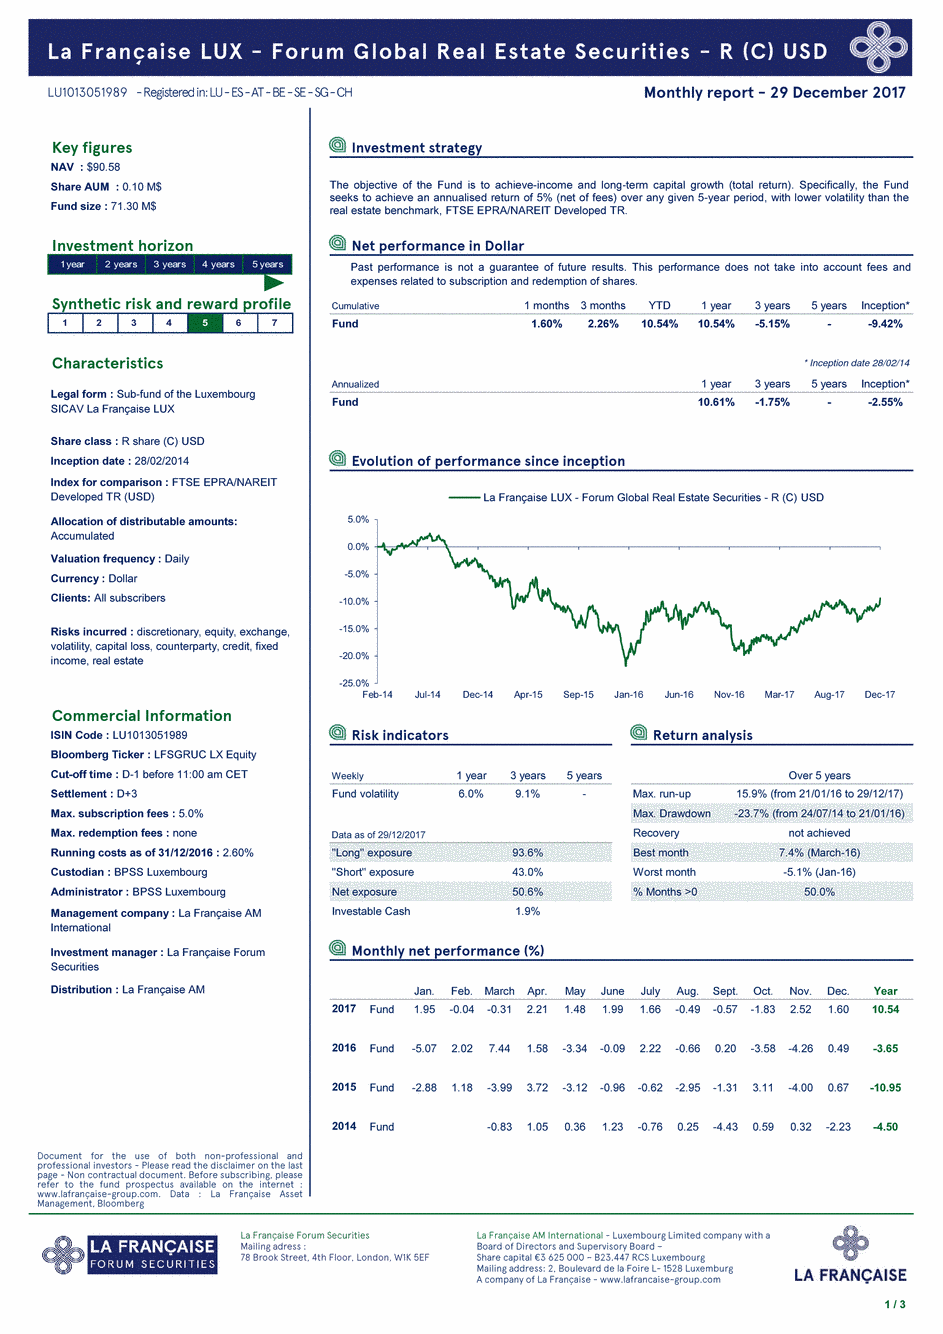 Reporting La Française LUX - Forum Global Real Estate Securities - R (C) USD - 31/12/2017 - Anglais